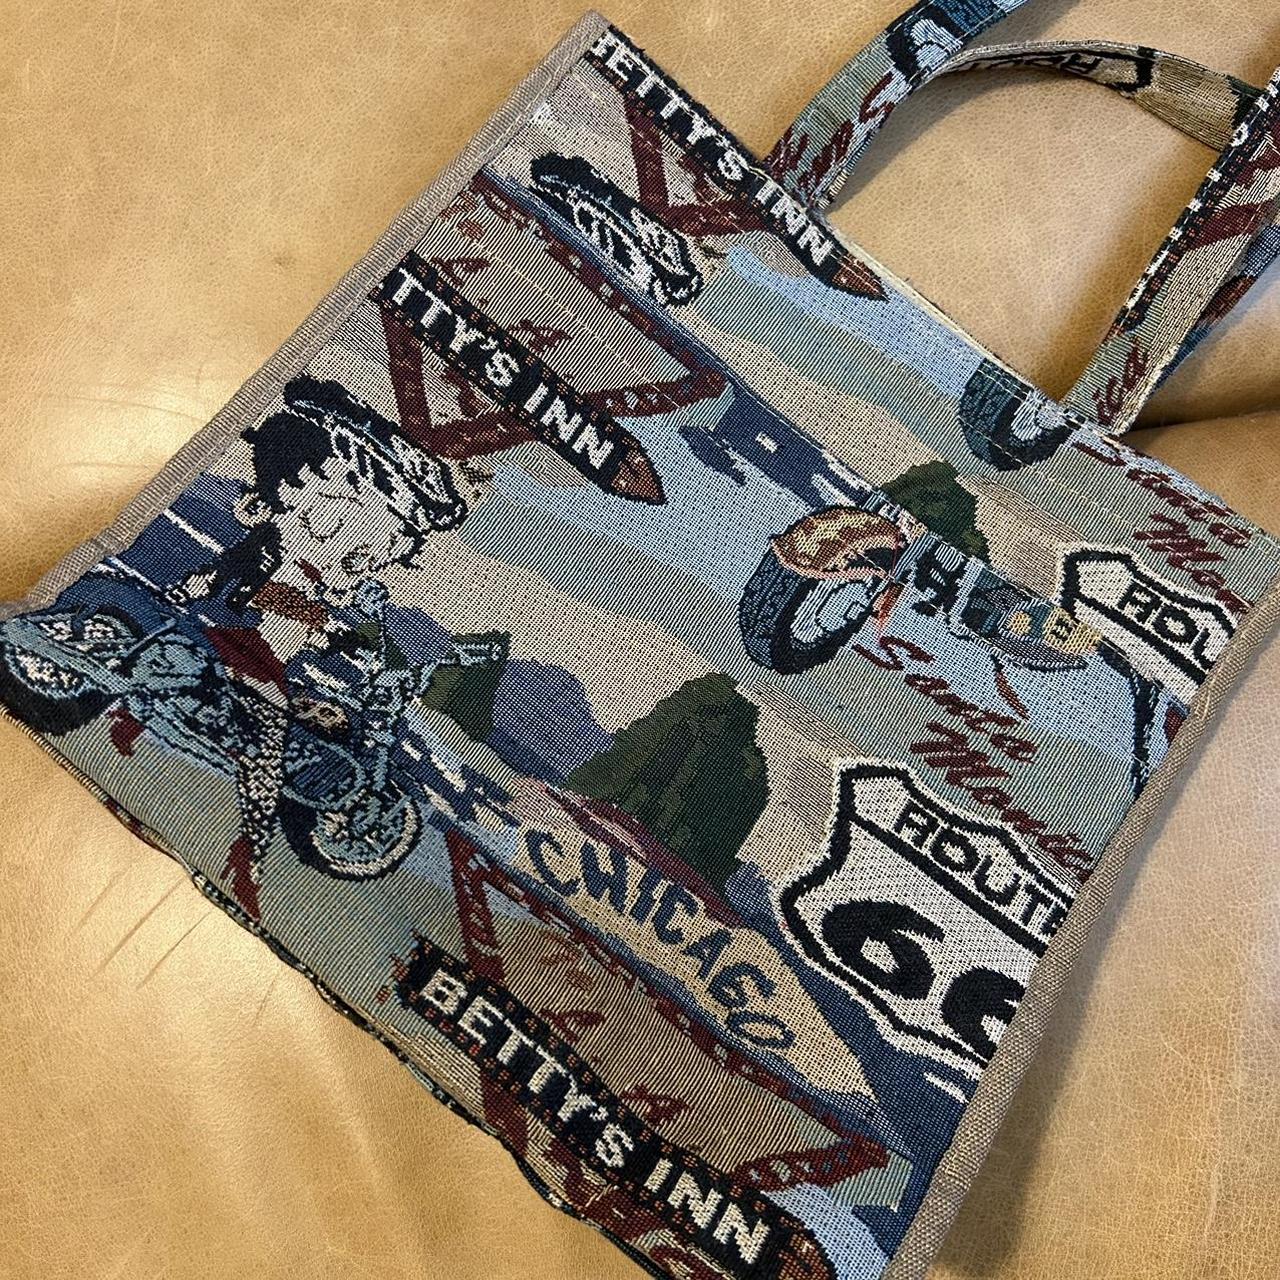 Vintage Betty Boop Route 66 Tapestry Bag Tote with... - Depop